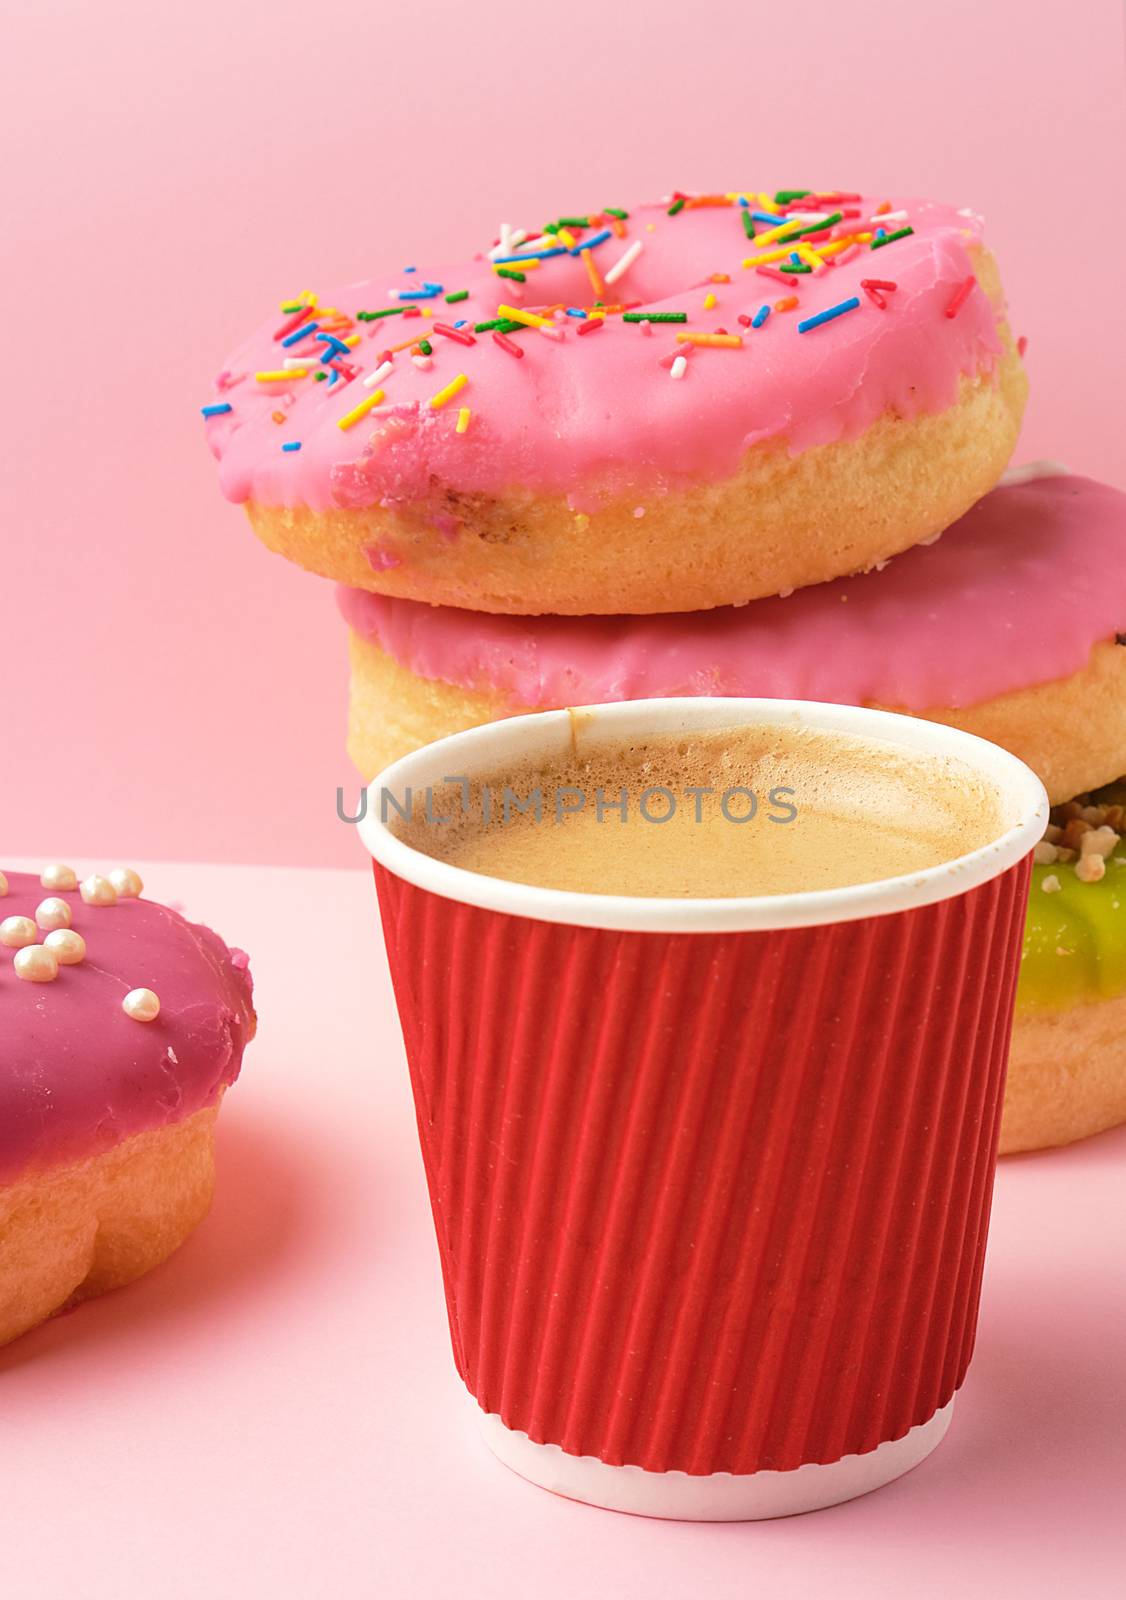 round red glazed donut and paper cup with coffee on a pink background, close up